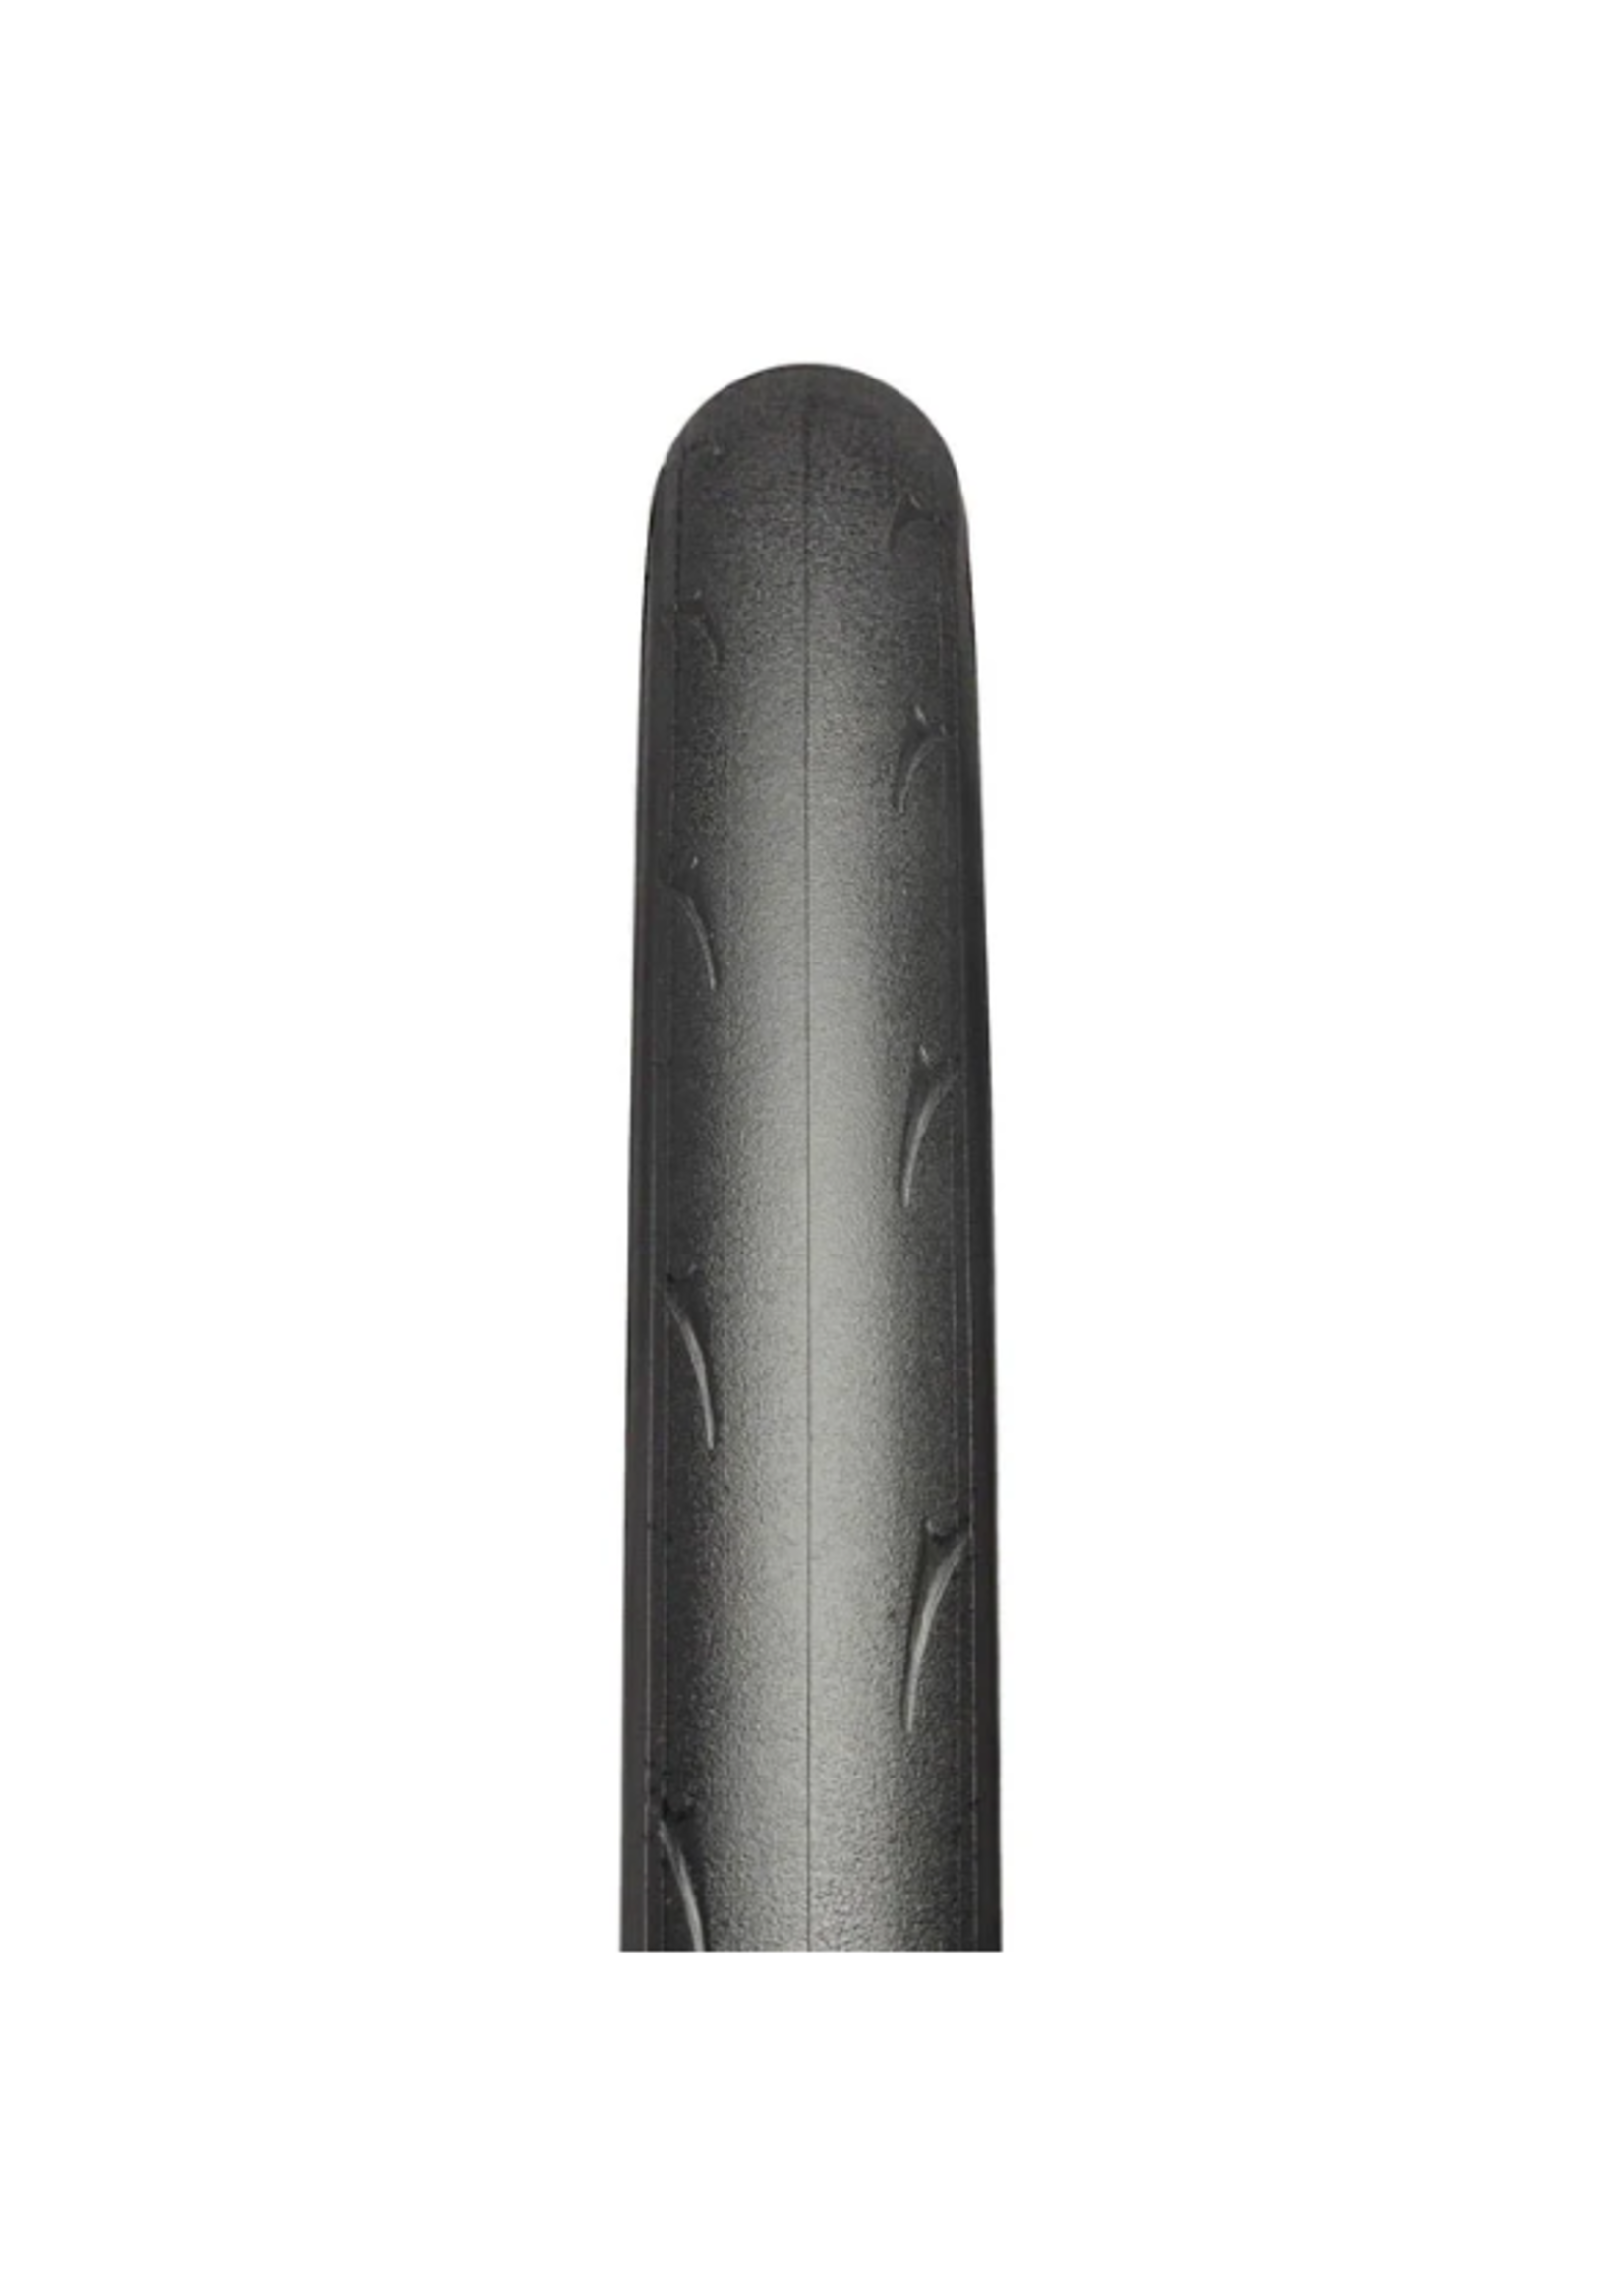 Maxxis Maxxis High Road Tire - 700 x 25, Tubeless, Folding, Black, HYPR, K2 Protection, ONE70